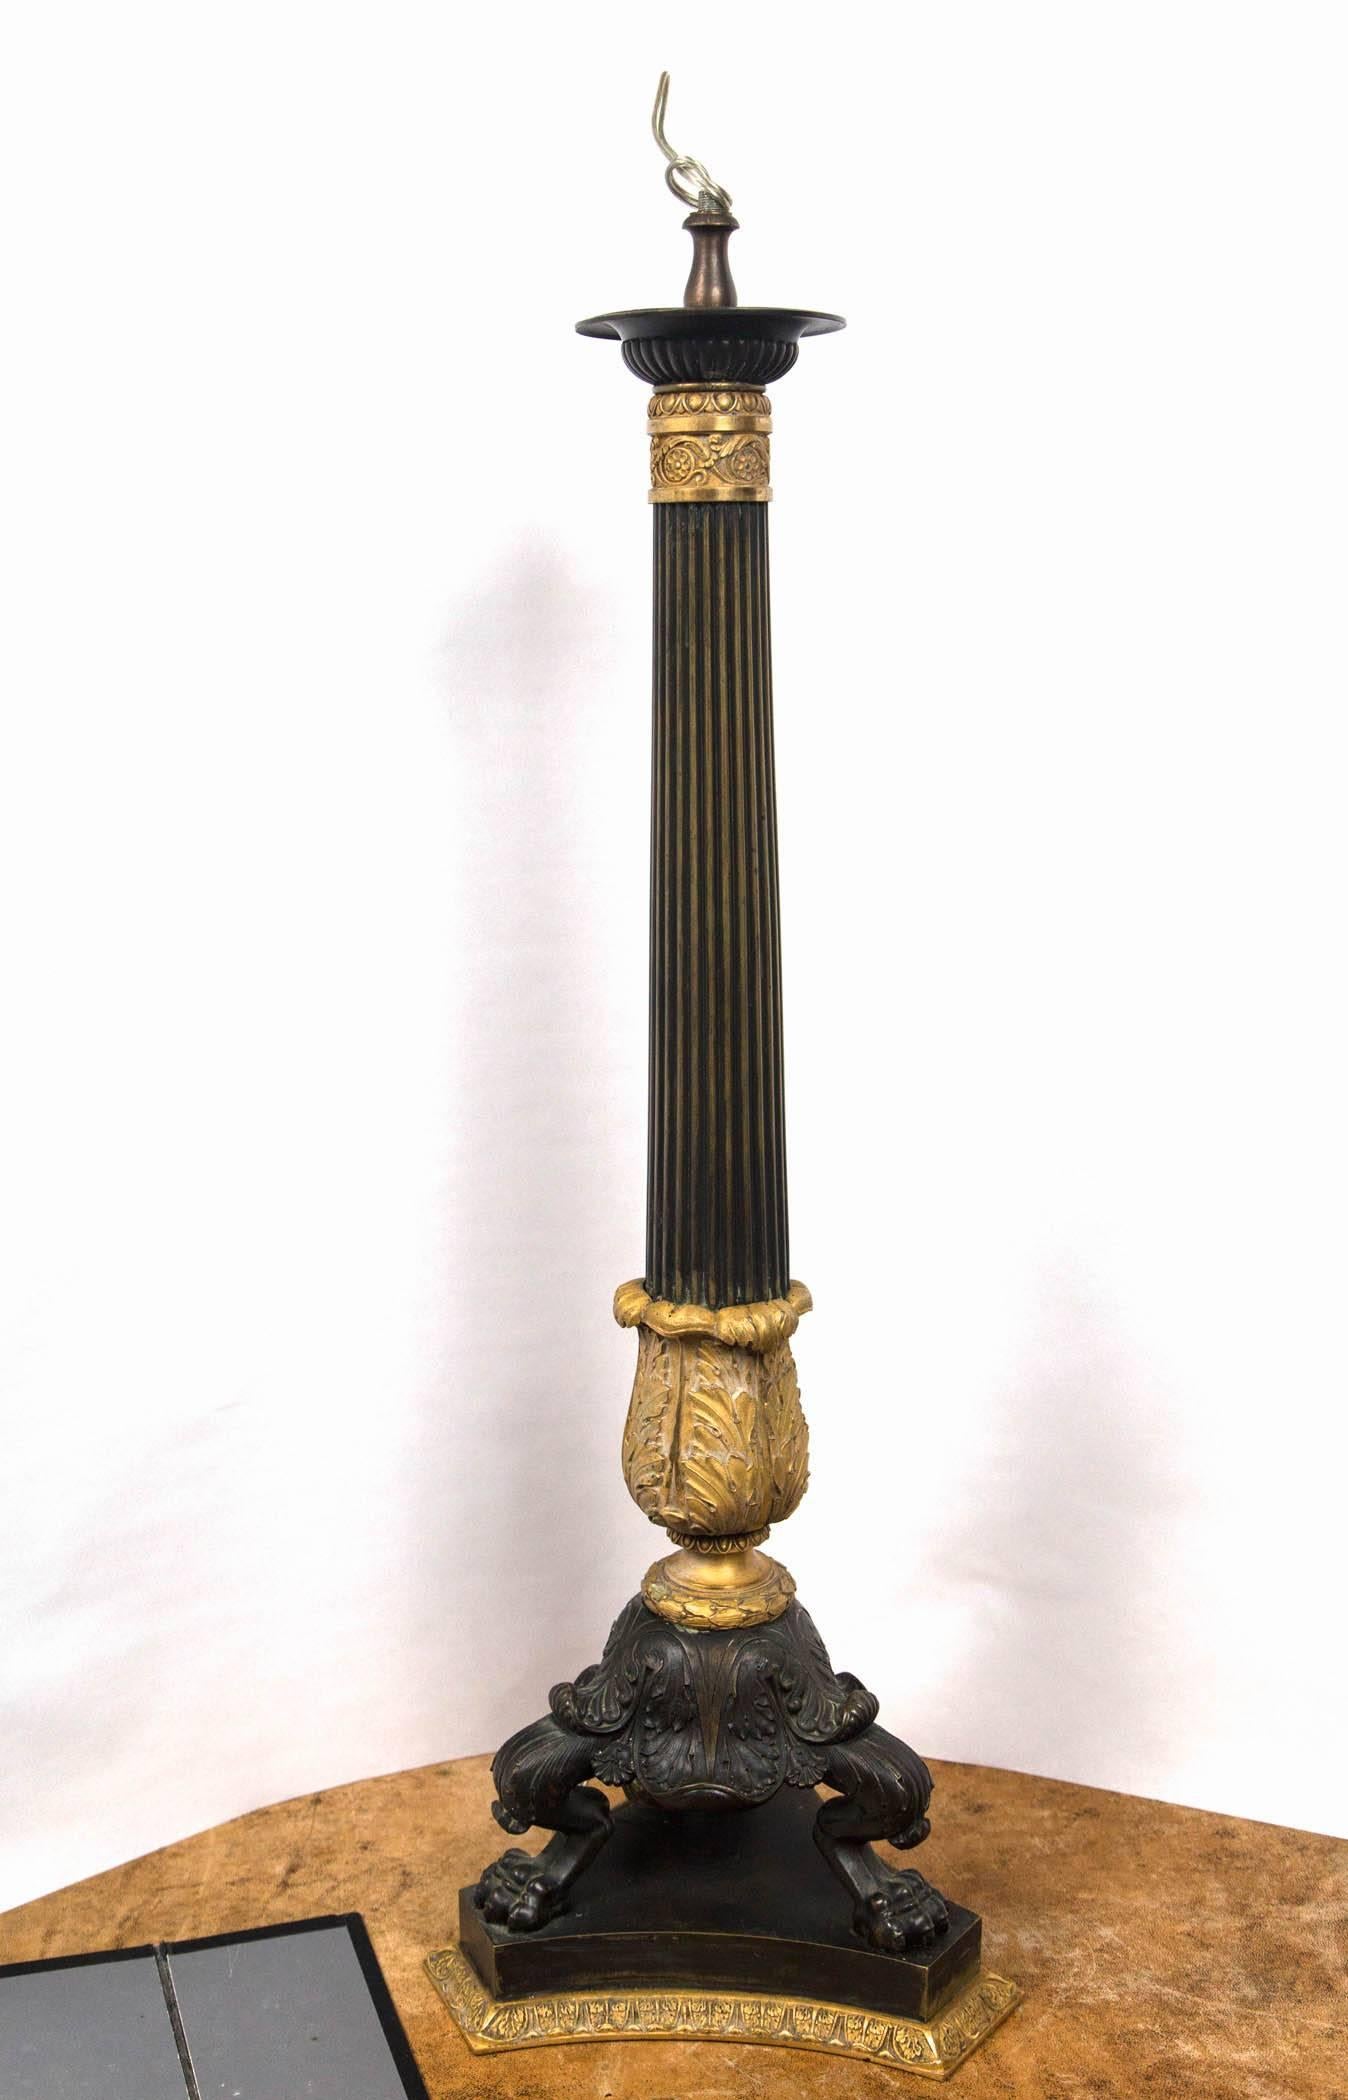 Fluted central shaft, topped by a fire gilt collar. The bottom of gilt acanthus leaf. Raised on fanciful scrolling legs with paw feet, on a tripartite base supported with a similar shaped gilt bronze bottom rim.